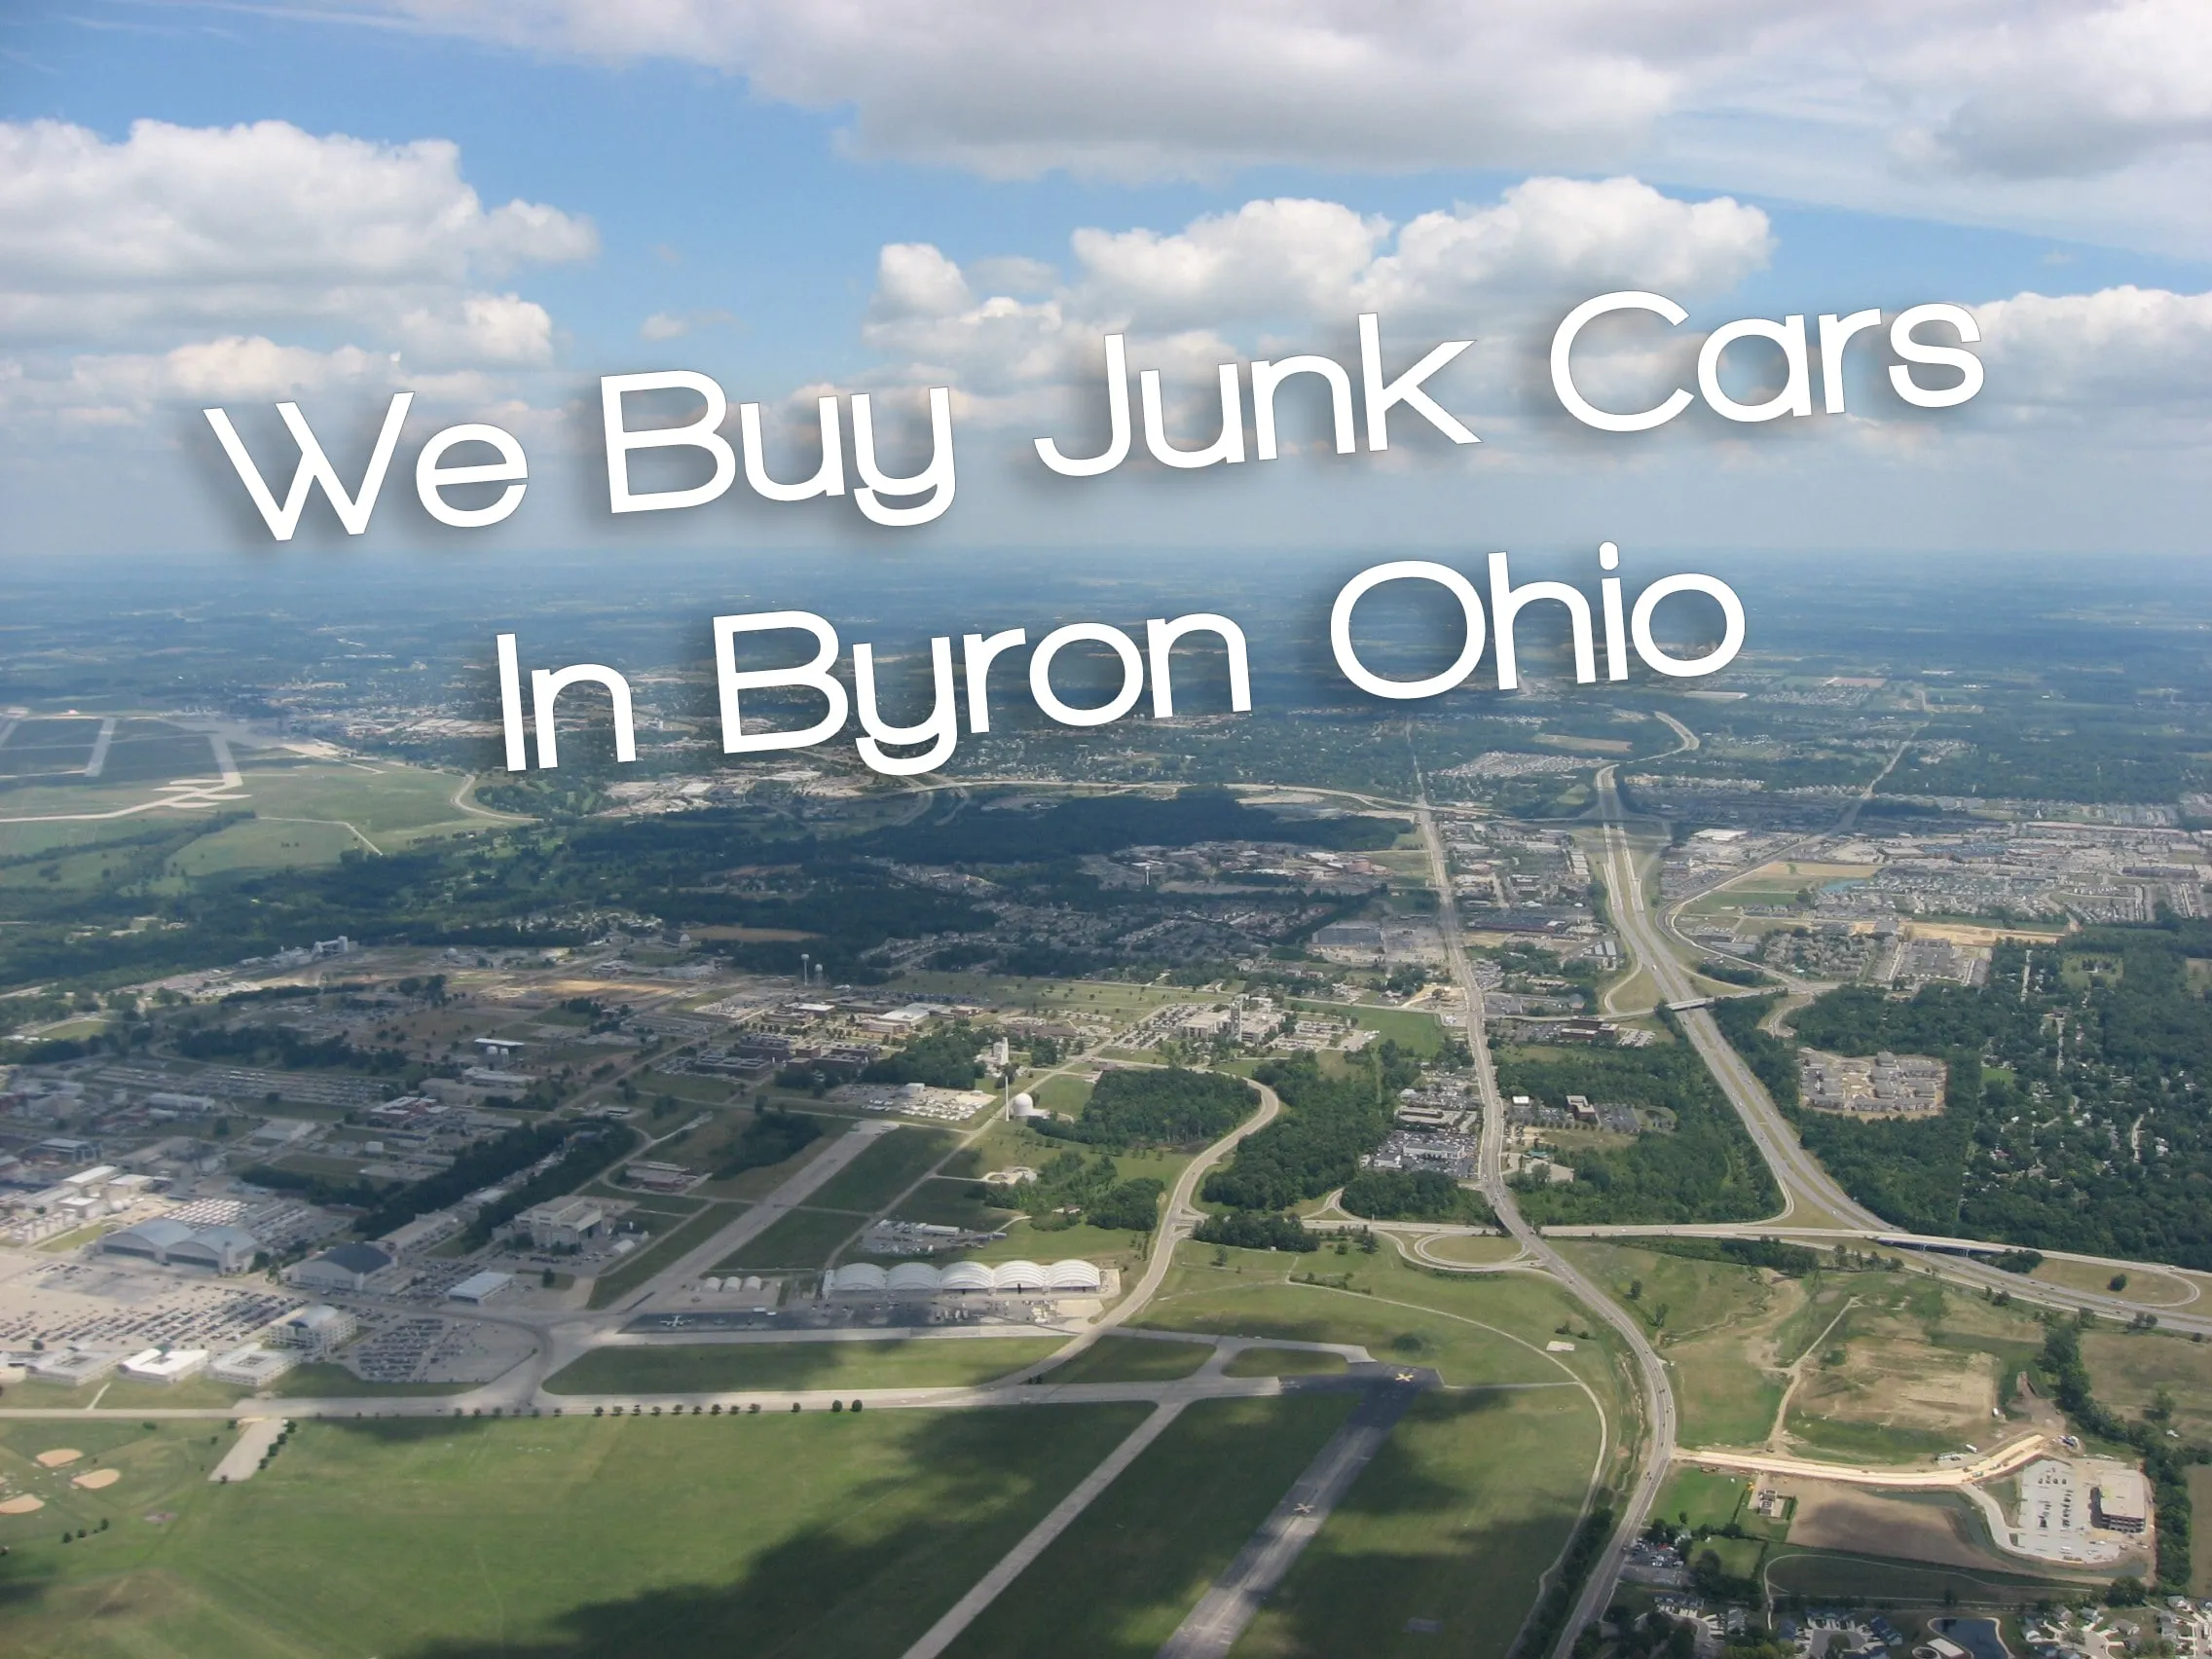 We Buy Junk Cars for Cash in Byron Ohio, Top Dollar, Same Day Pickup